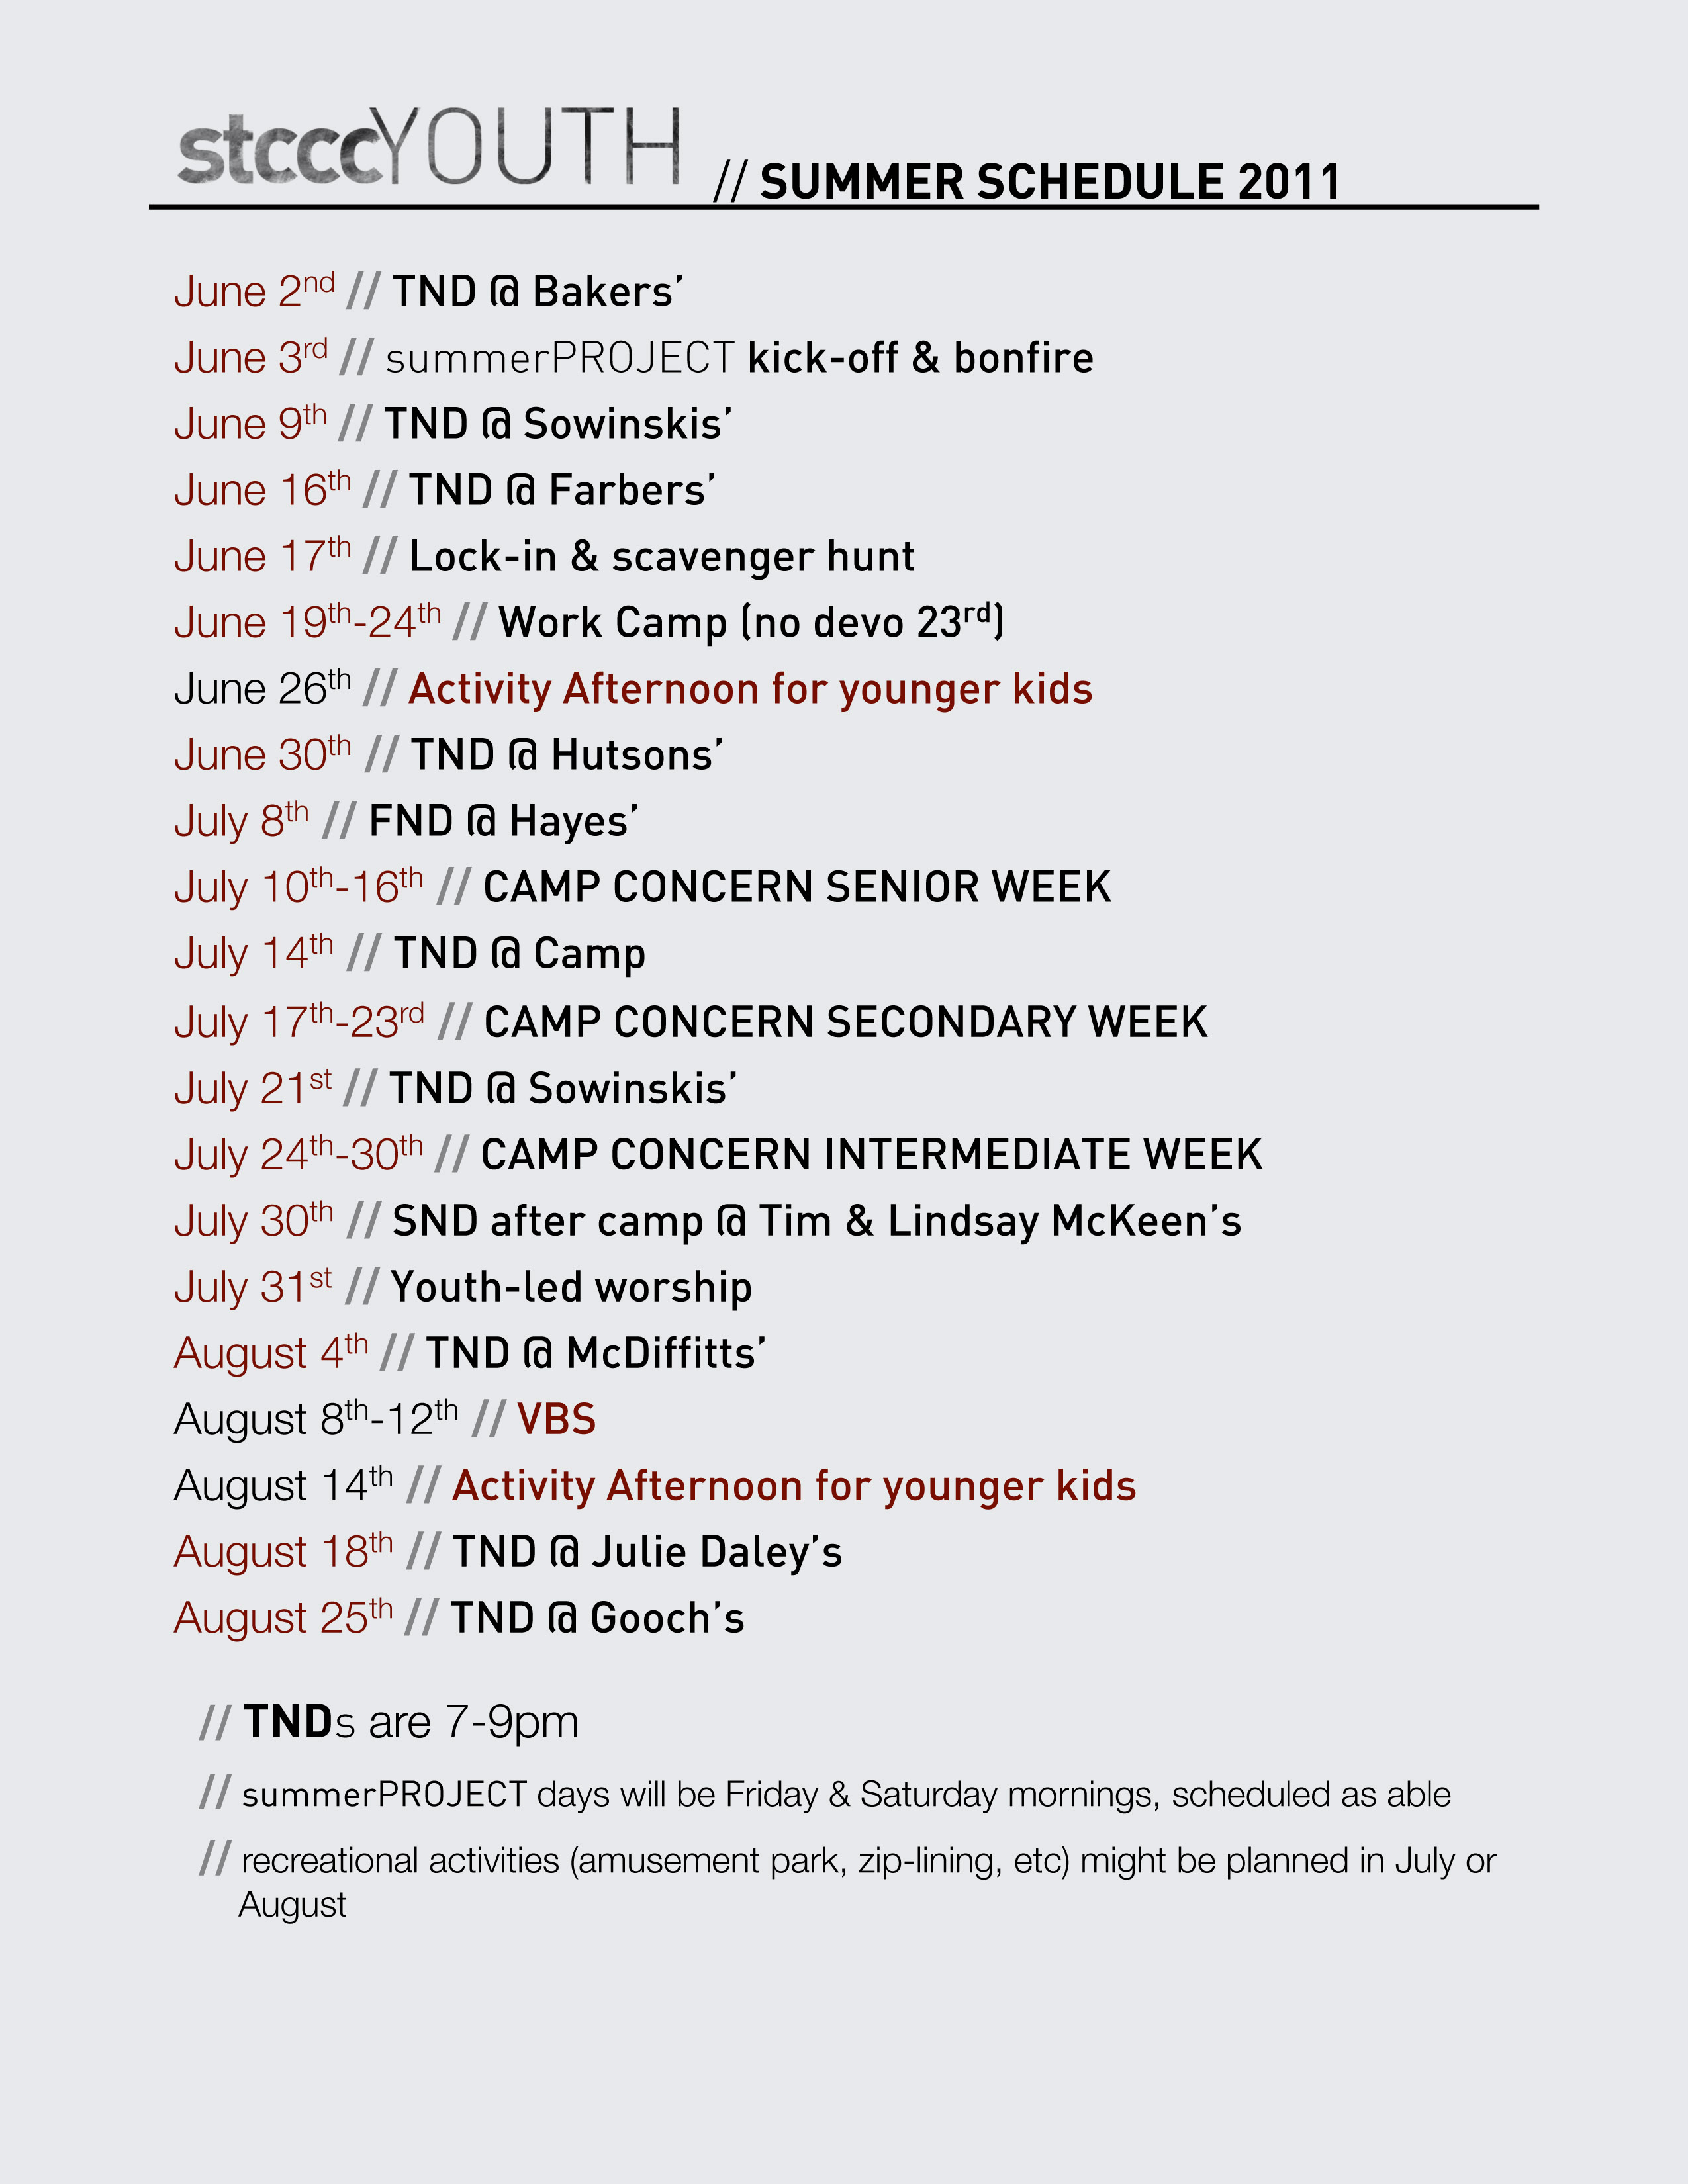 // SUMMER SCHEDULE 2011  June 2nd // TND @ Bakers’ June 3rd // summerPROJECT kick-off & bonfire June 9th // TND @ Sowinskis’ June 16th // TND @ Farbers’ June 17th // Lock-in & scavenger hunt June 19th-24th // Work Camp (no devo 23rd) June 26th // Activity Afternoon for younger kids June 30th // TND @ Hutsons’ July 8th // FND @ Hayes’ July 10th-16th // CAMP CONCERN SENIOR WEEK July 14th // TND @ Camp July 17th-23rd // CAMP CONCERN SECONDARY WEEK July 21st // TND @ Sowinskis’ July 24th-30th // CAMP CONCERN INTERMEDIATE WEEK July 30th // SND after camp @ Tim & Lindsay McKeen’s July 31st // Youth-led worship August 4th // TND @ McDiffitts’ August 8th-12th // VBS August 14th // Activity Afternoon for younger kids August 18th // TND @ Julie Daley’s August 25th // TND @ Gooch’s  // TNDs are 7-9pm // summerPROJECT days will be Friday & Saturday mornings,      scheduled as able // recreational activities (amusement park, zip-lining, etc) might be     planned in July or August